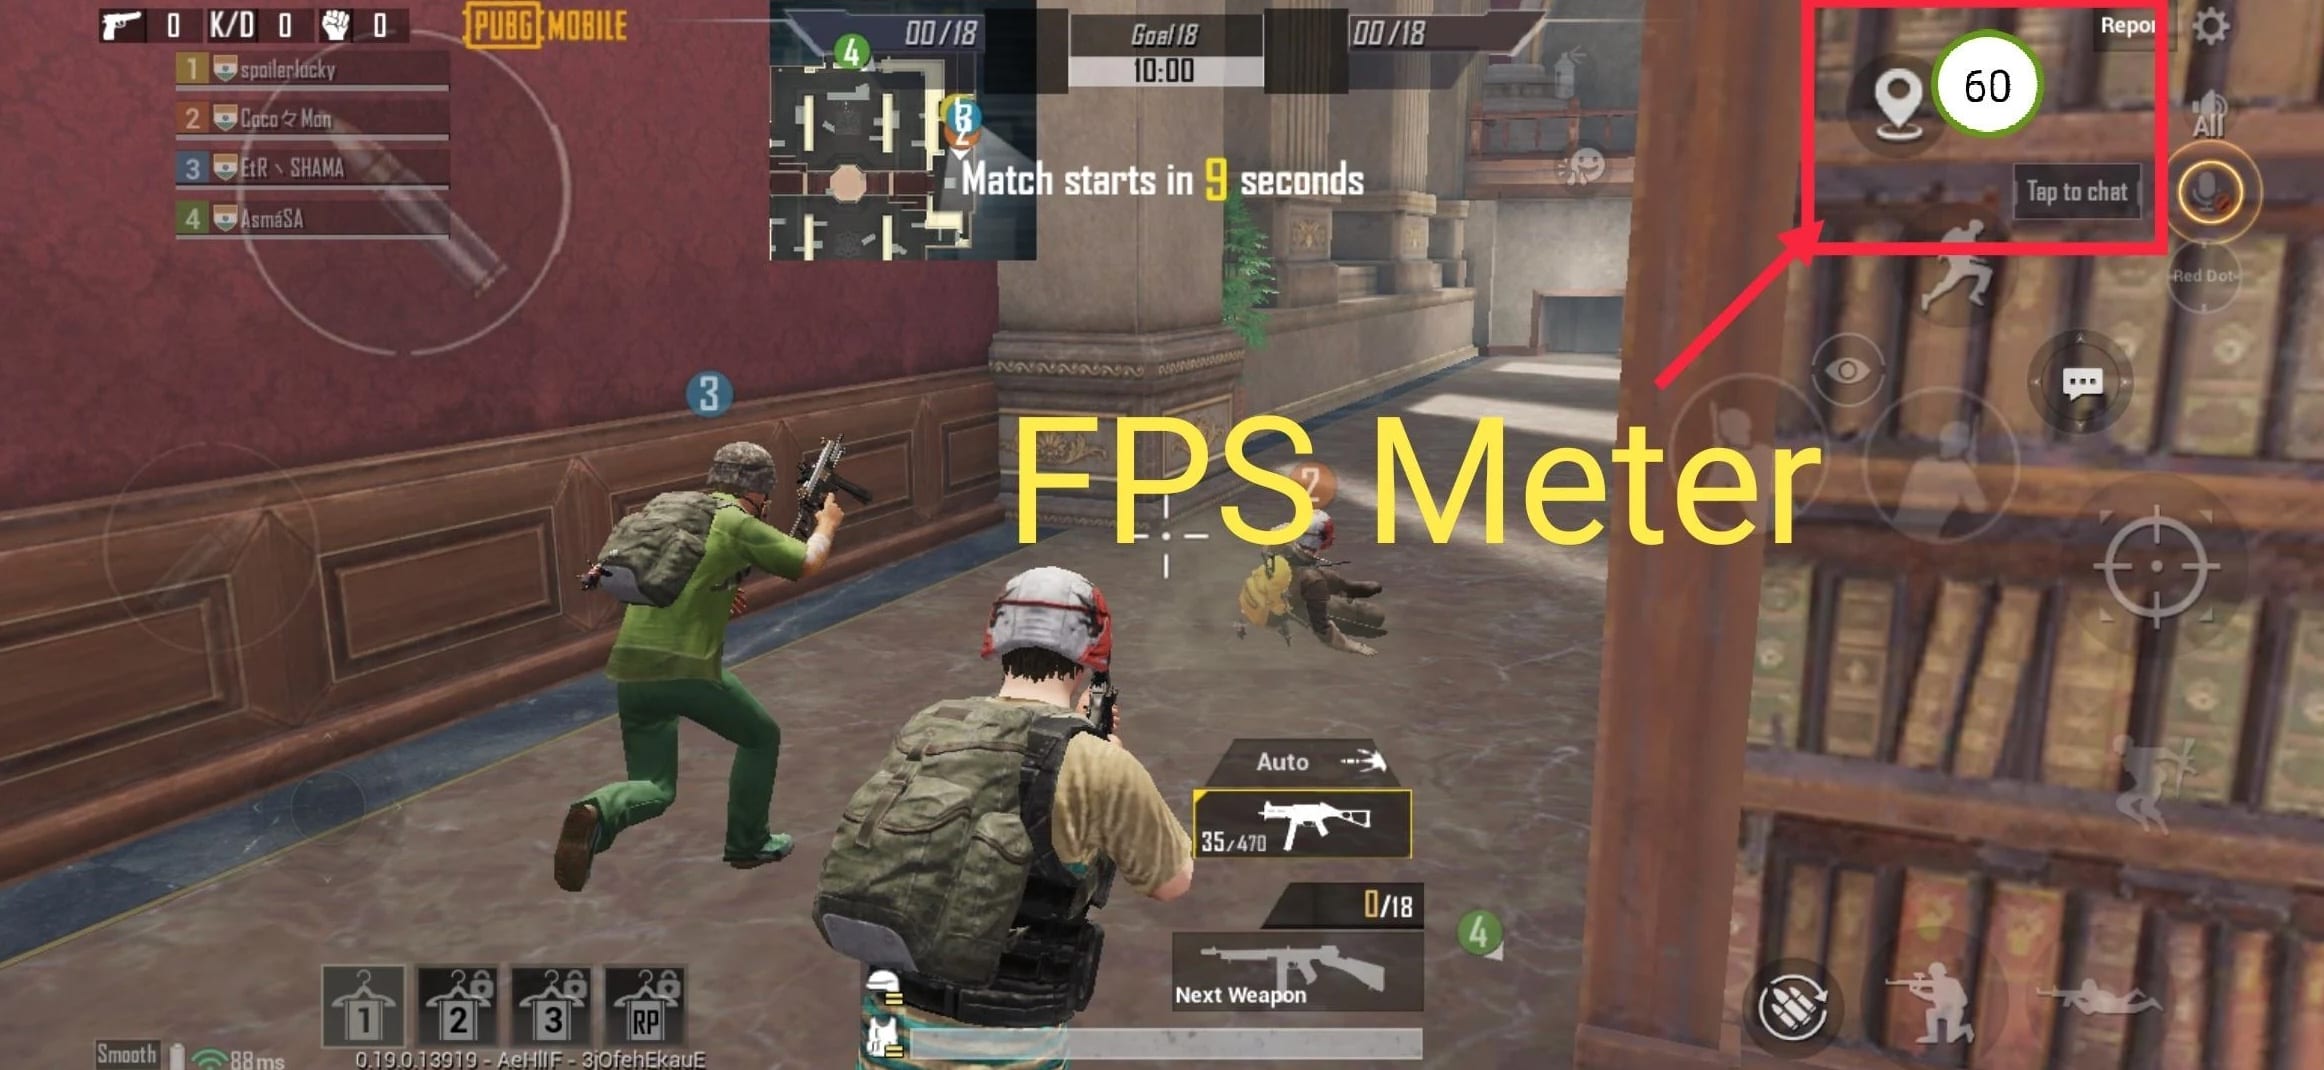 FPS Meter (PUBG Booster for Low End Devices)